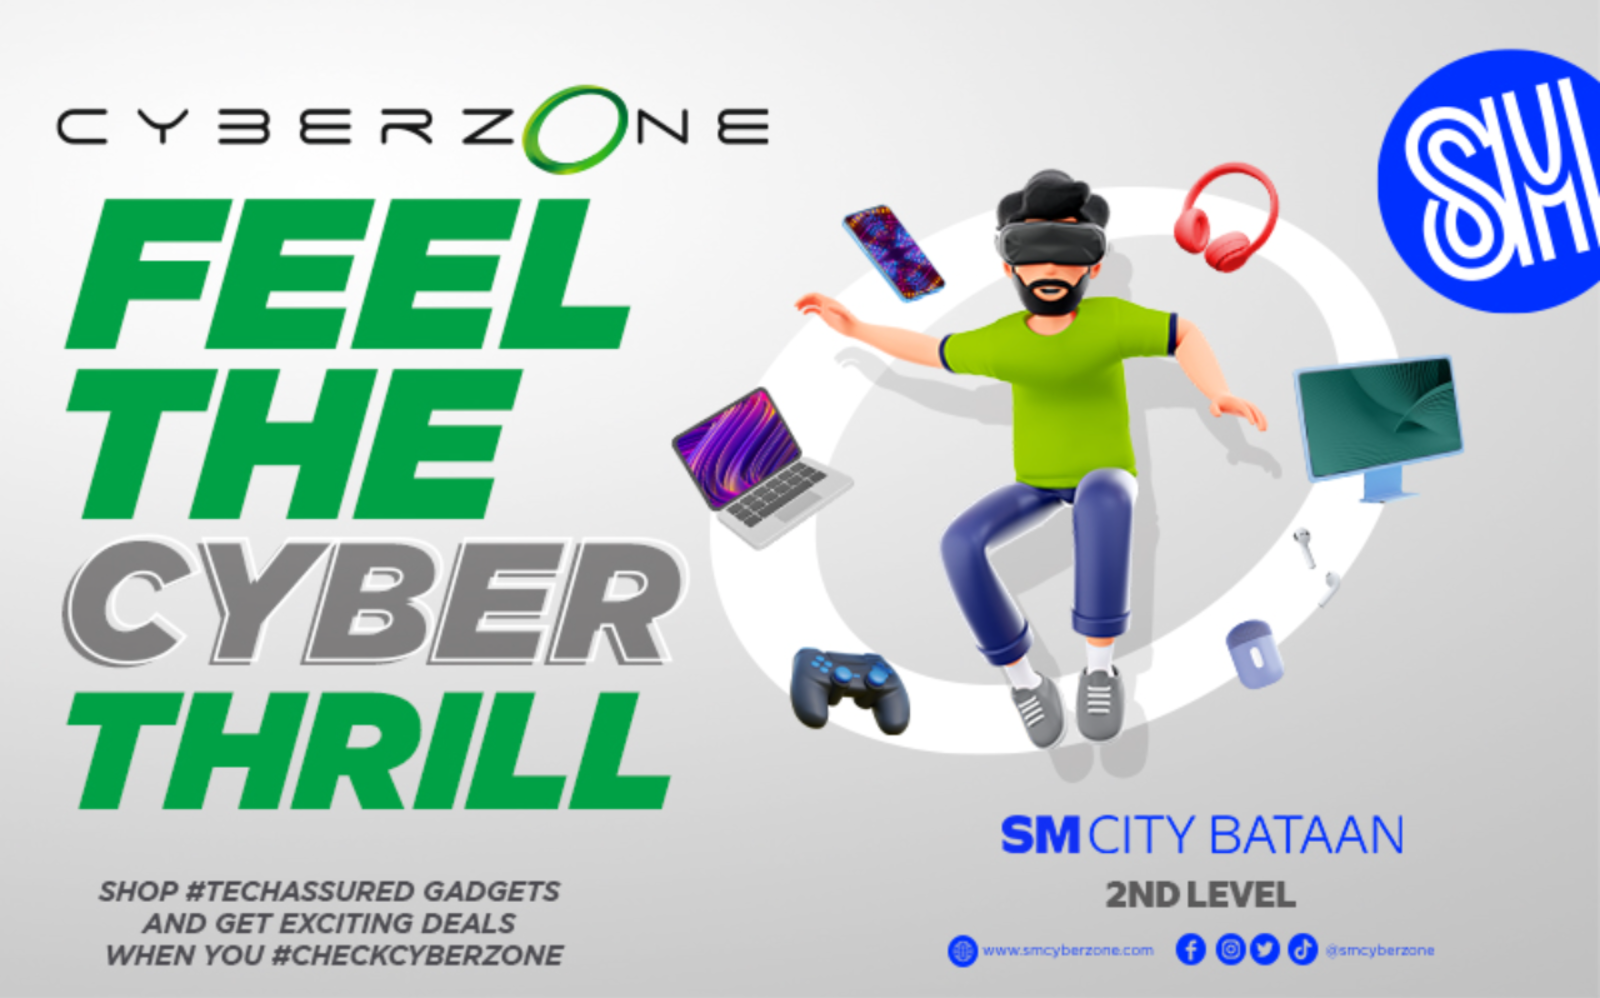 SM Cyberzone Opens in SM City Bataan on May 19, 2023!